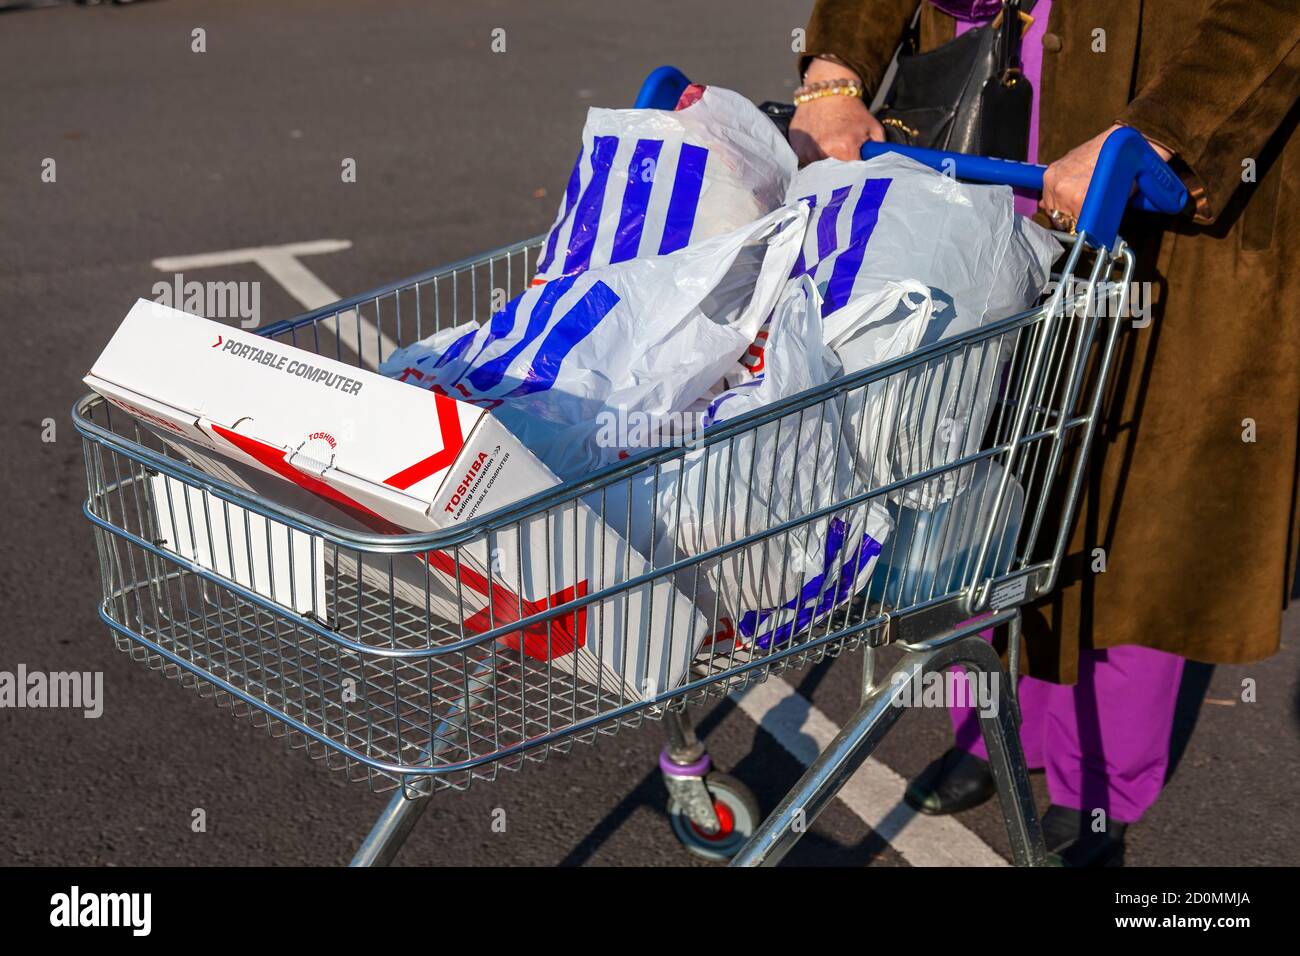 London, UK, November 19, 201 : Customer shopper pushing a shopping trolley  cart full of plastic carrier bags at its Tesco Extra supermarket retail bus  Stock Photo - Alamy